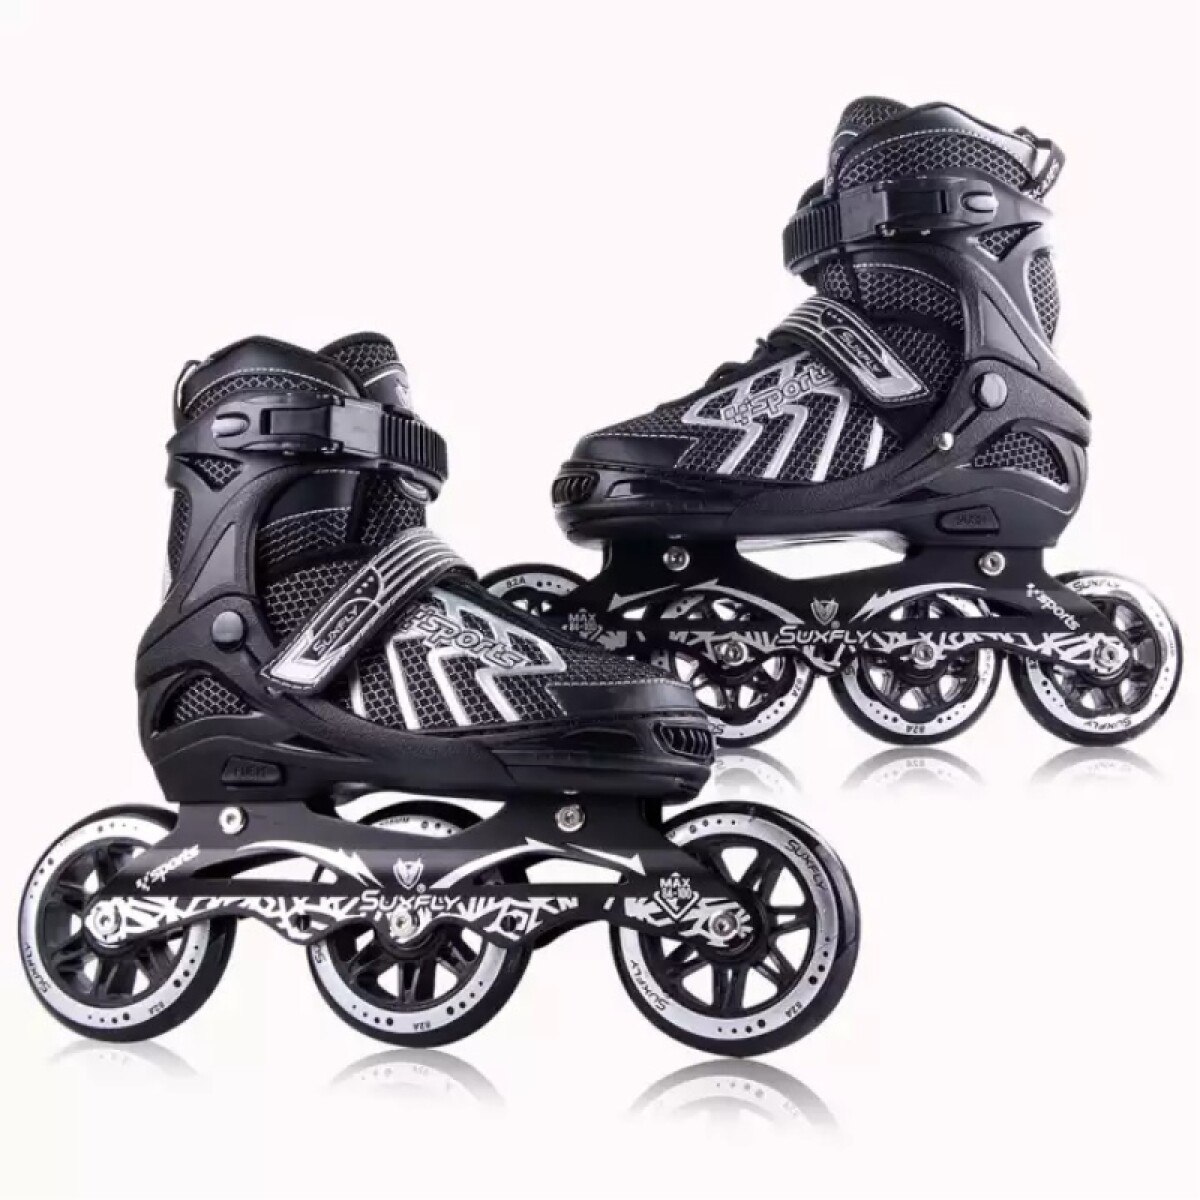 Roller Patines 3 Ruedas Lineal Suxfly Regulable Negro - Talle L (39 Al 42) 